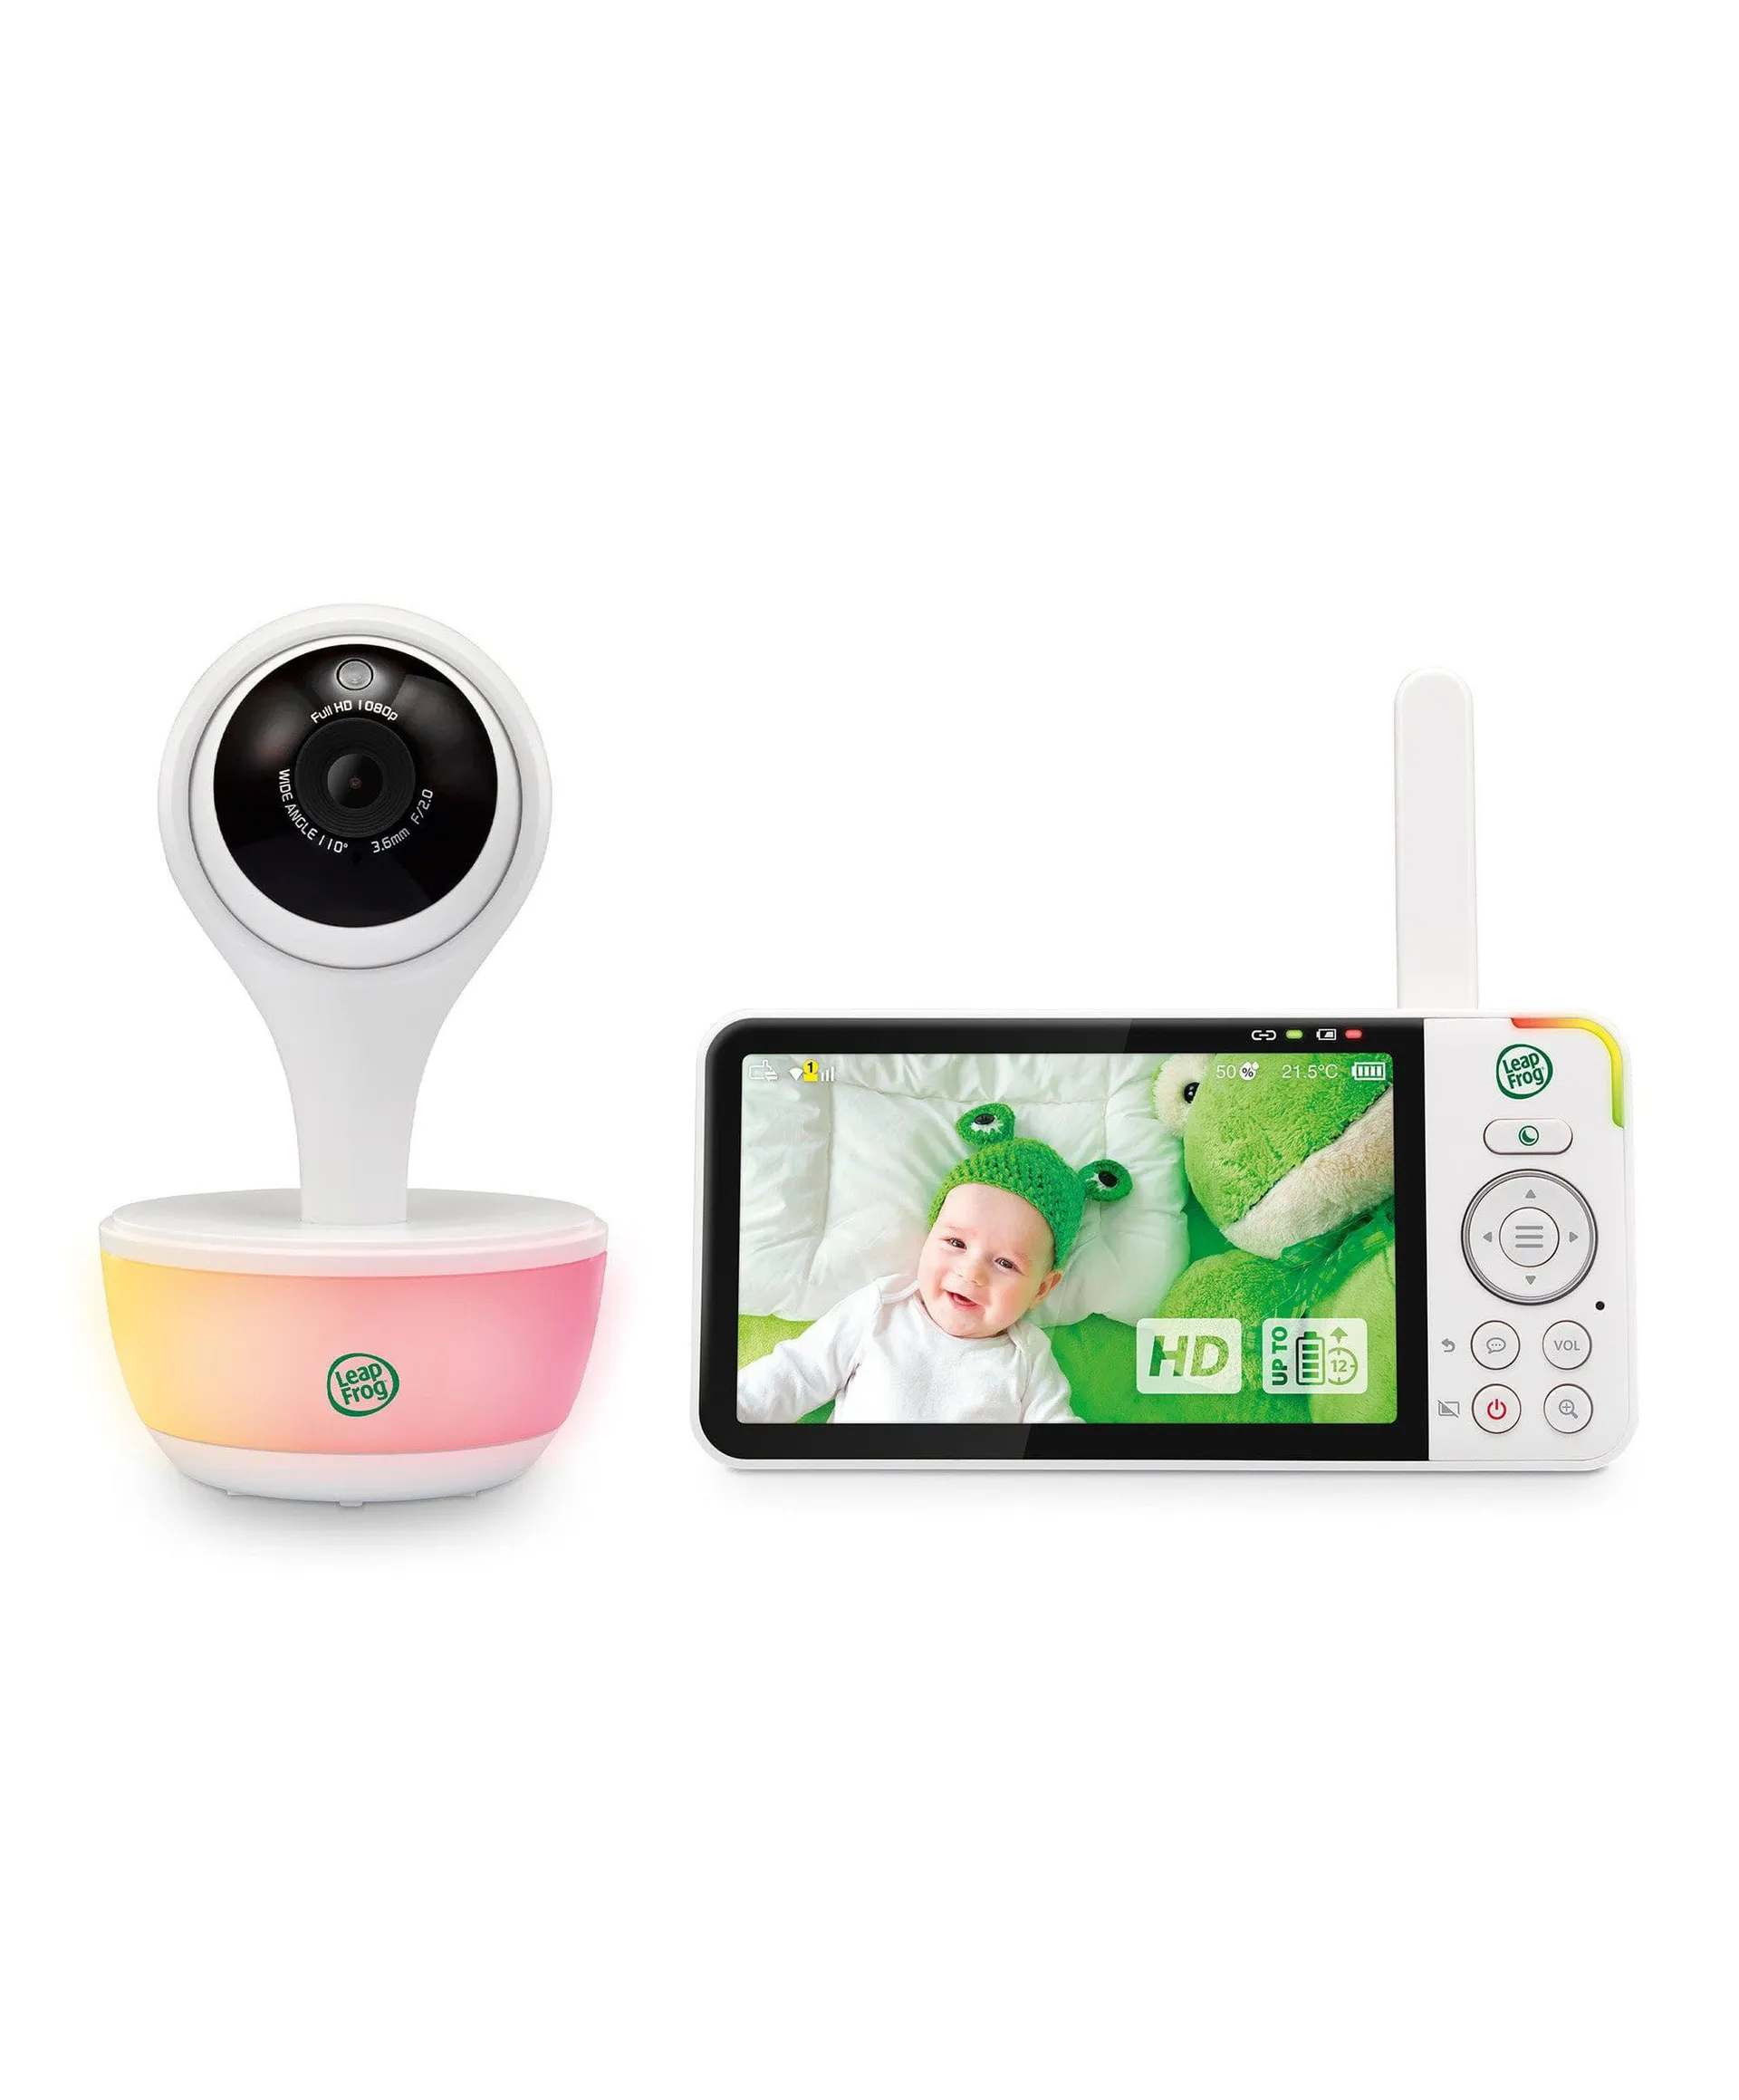 LeapFrog LF815HD 5' Smart Video Baby Monitor with Colour Night Vision - White